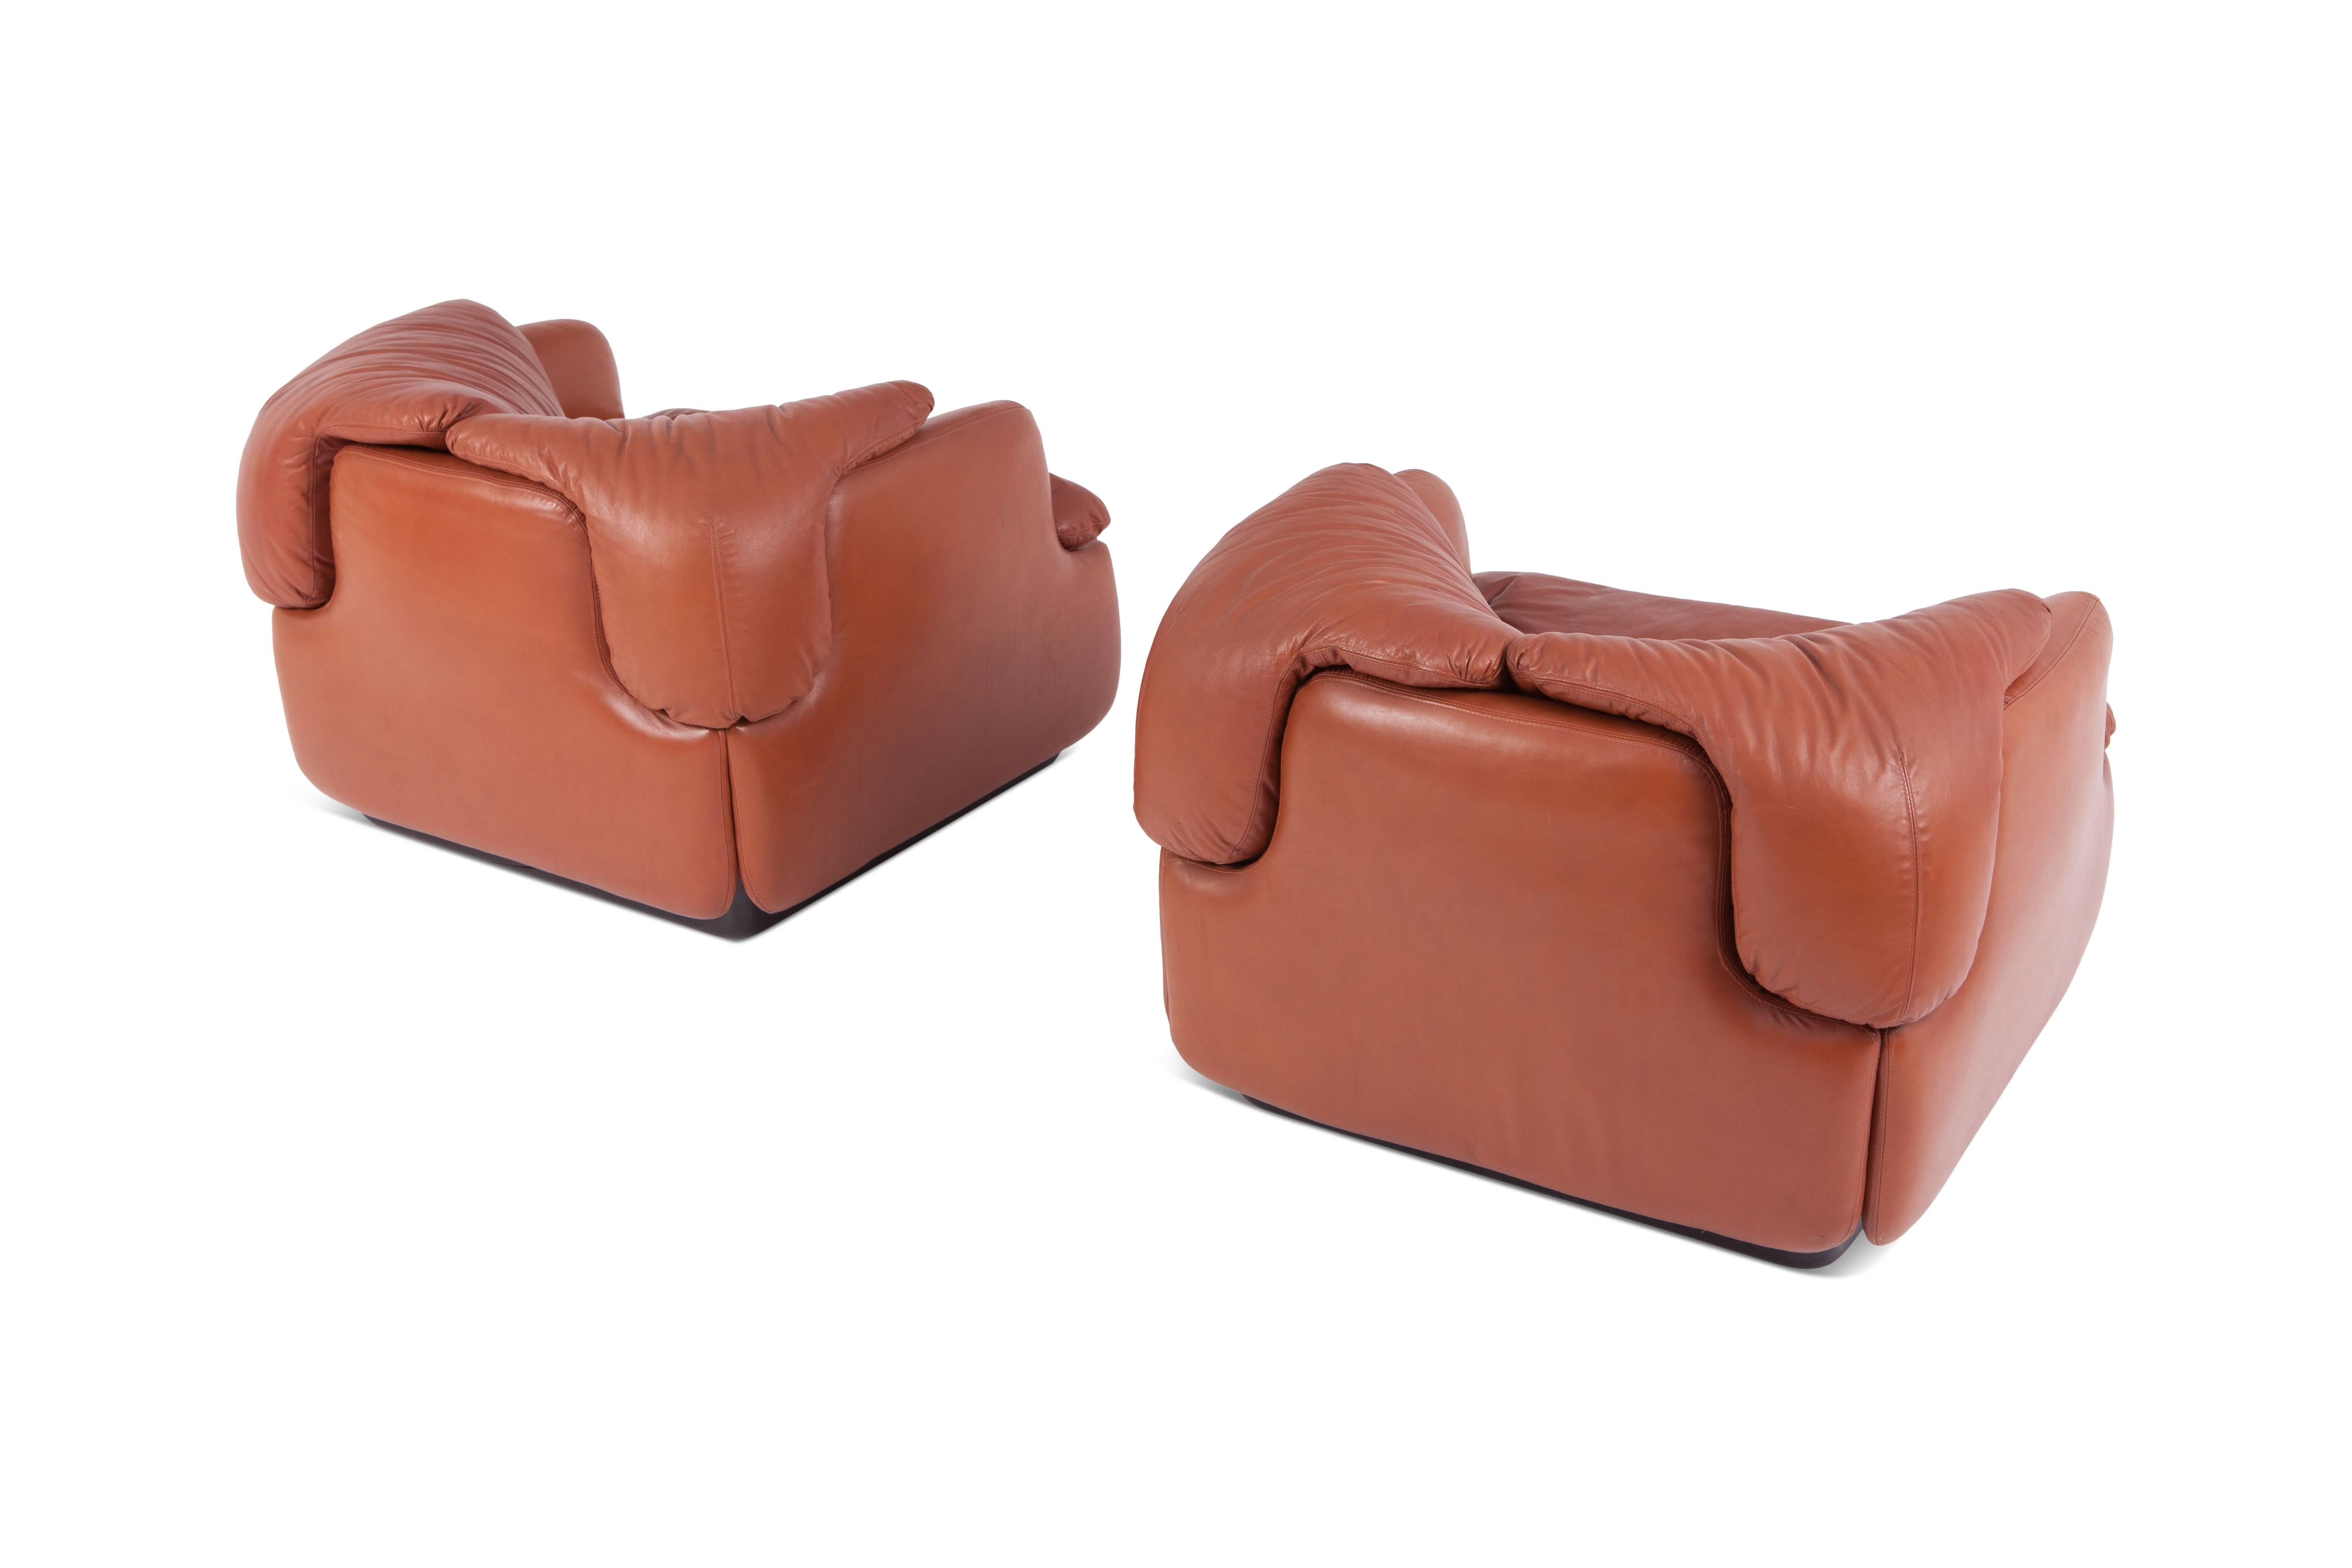 Late 20th Century Saporiti “Confidential” Leather Club Chairs by Alberto Rosselli